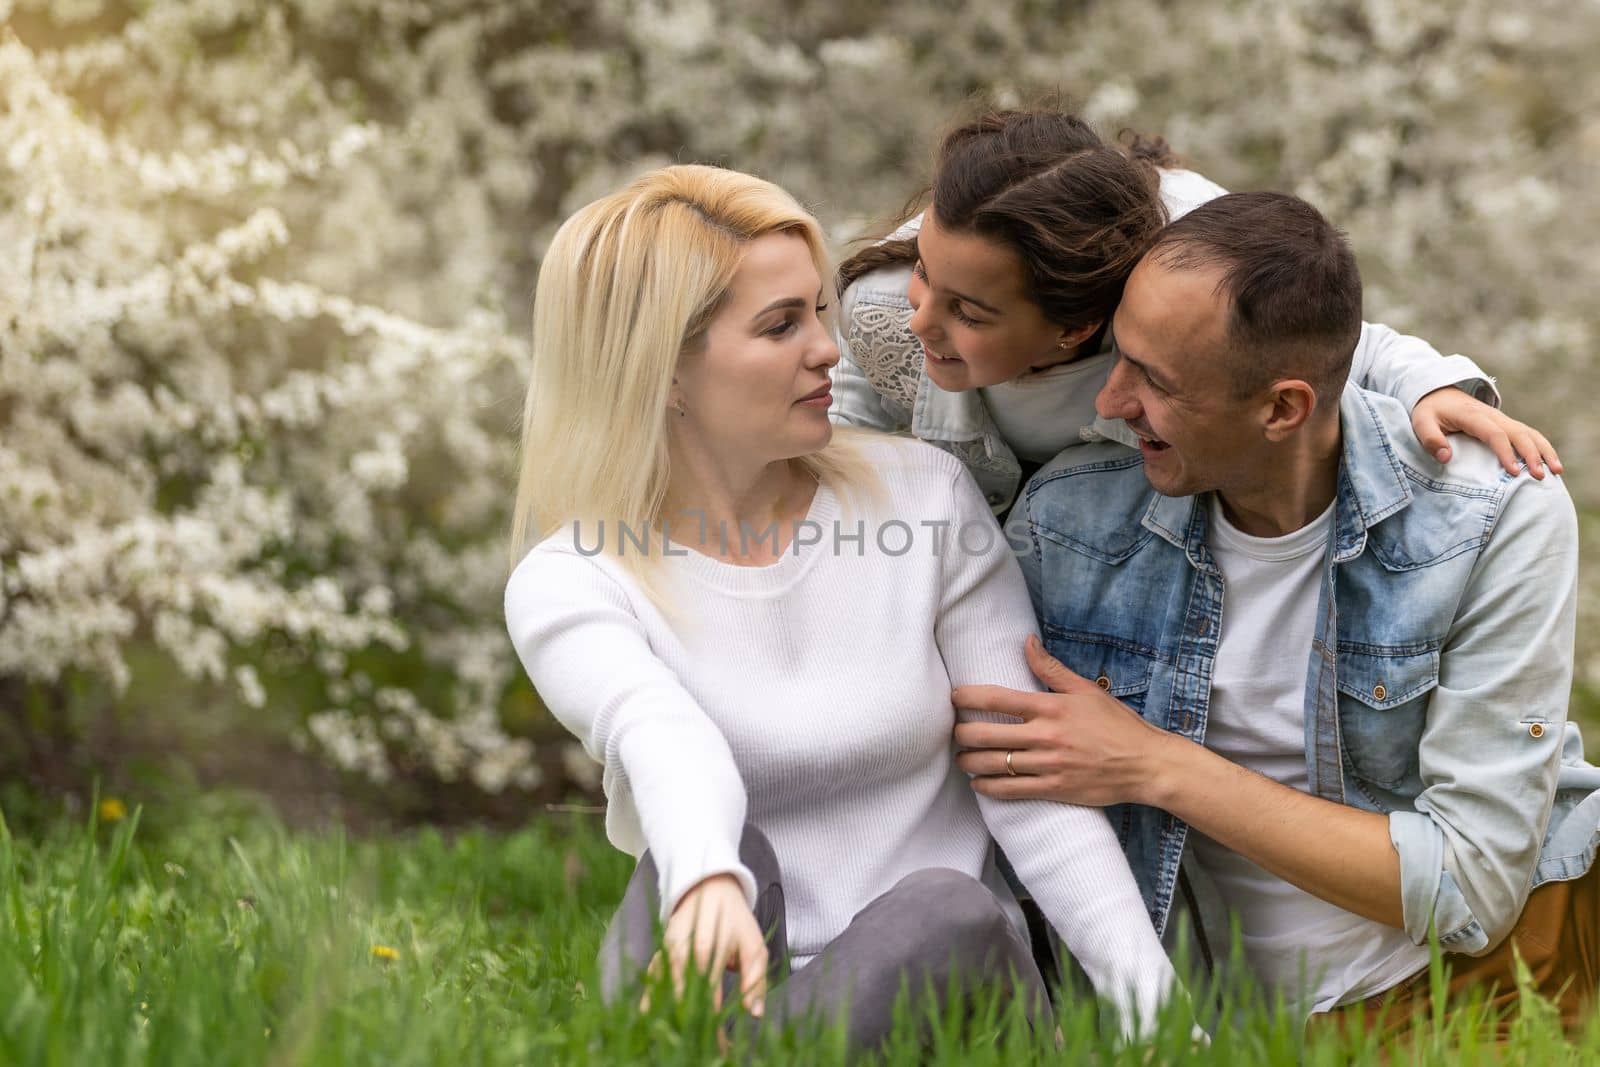 Happy family outdoors spending time together. Father, mother and daughter are having fun on a green floral grass